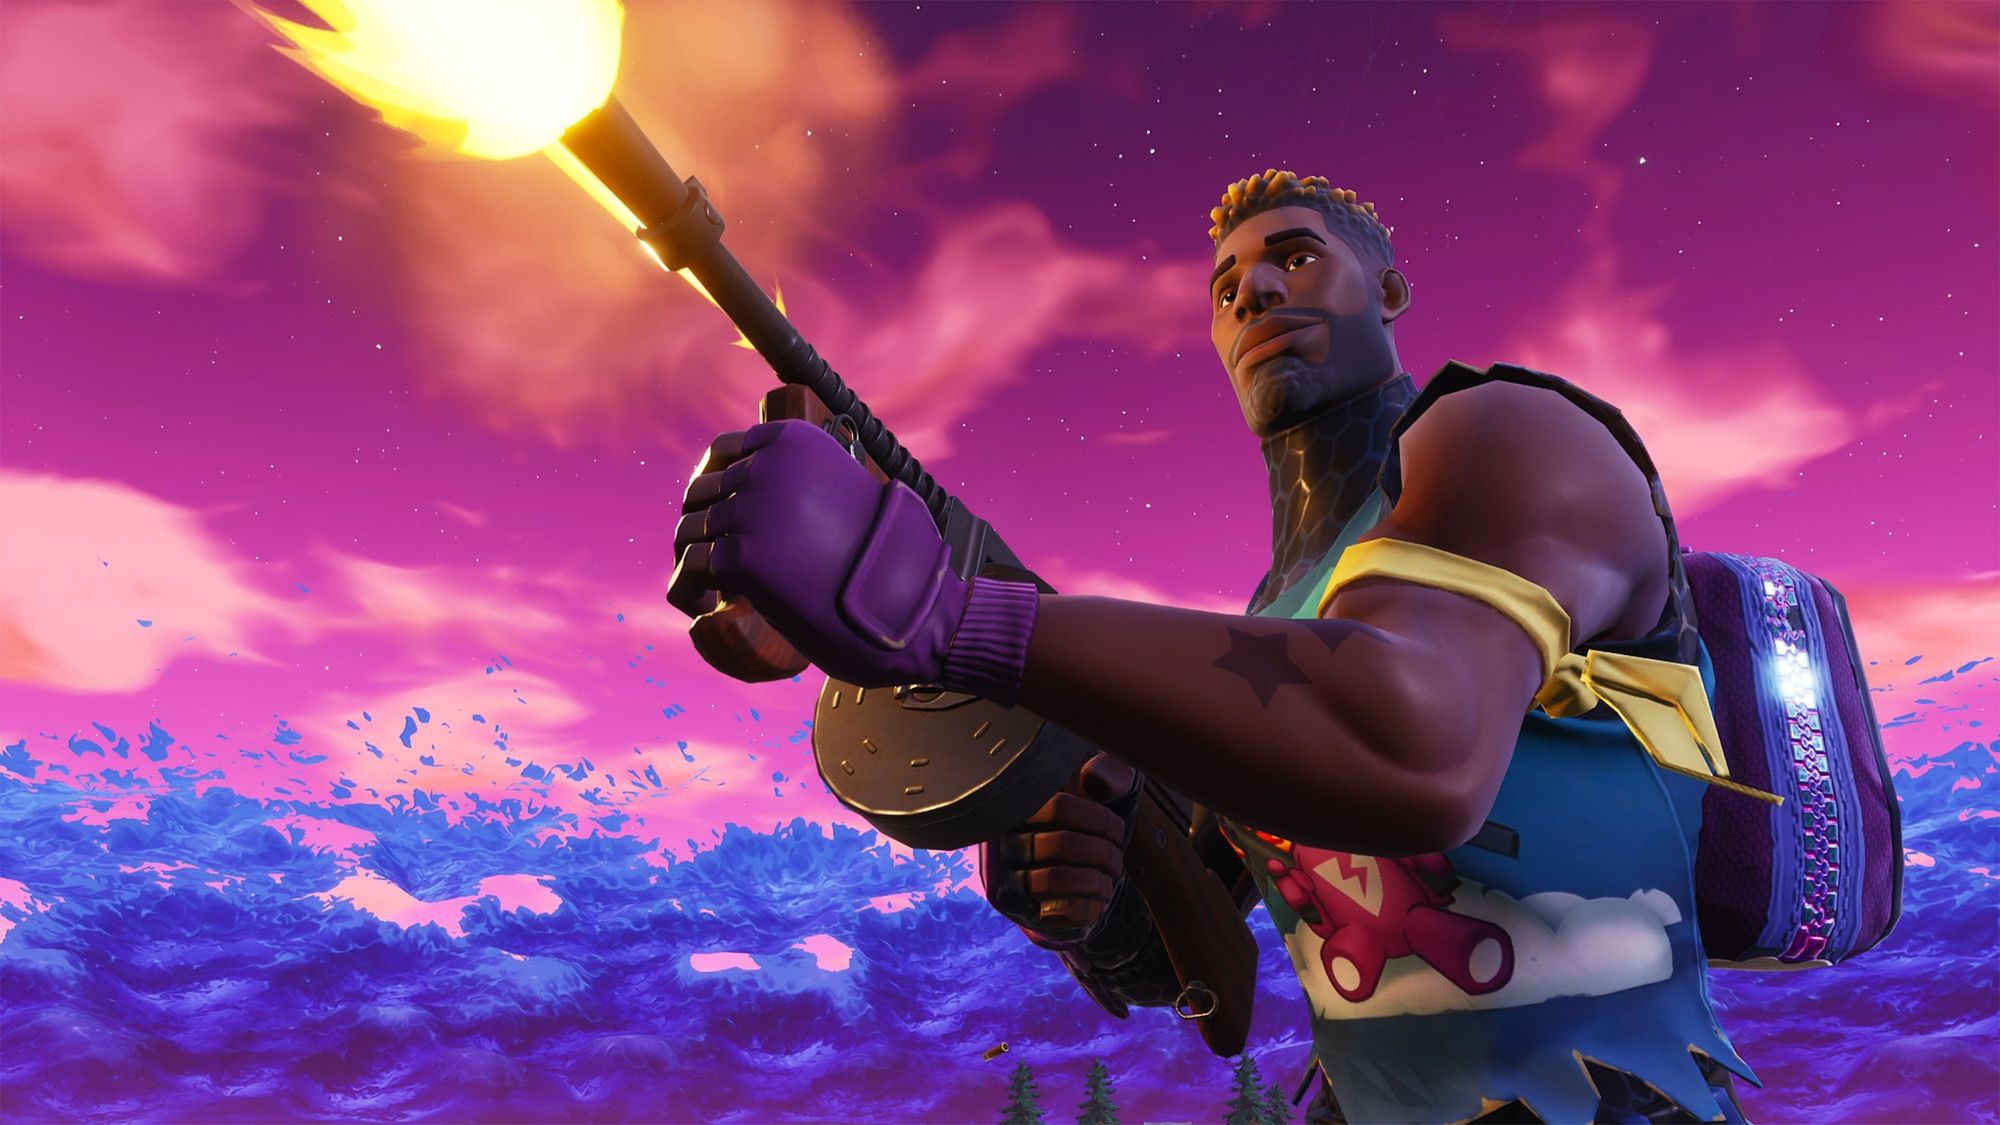 Fortnite Removing Support for Competitive Stretched Resolution on PC